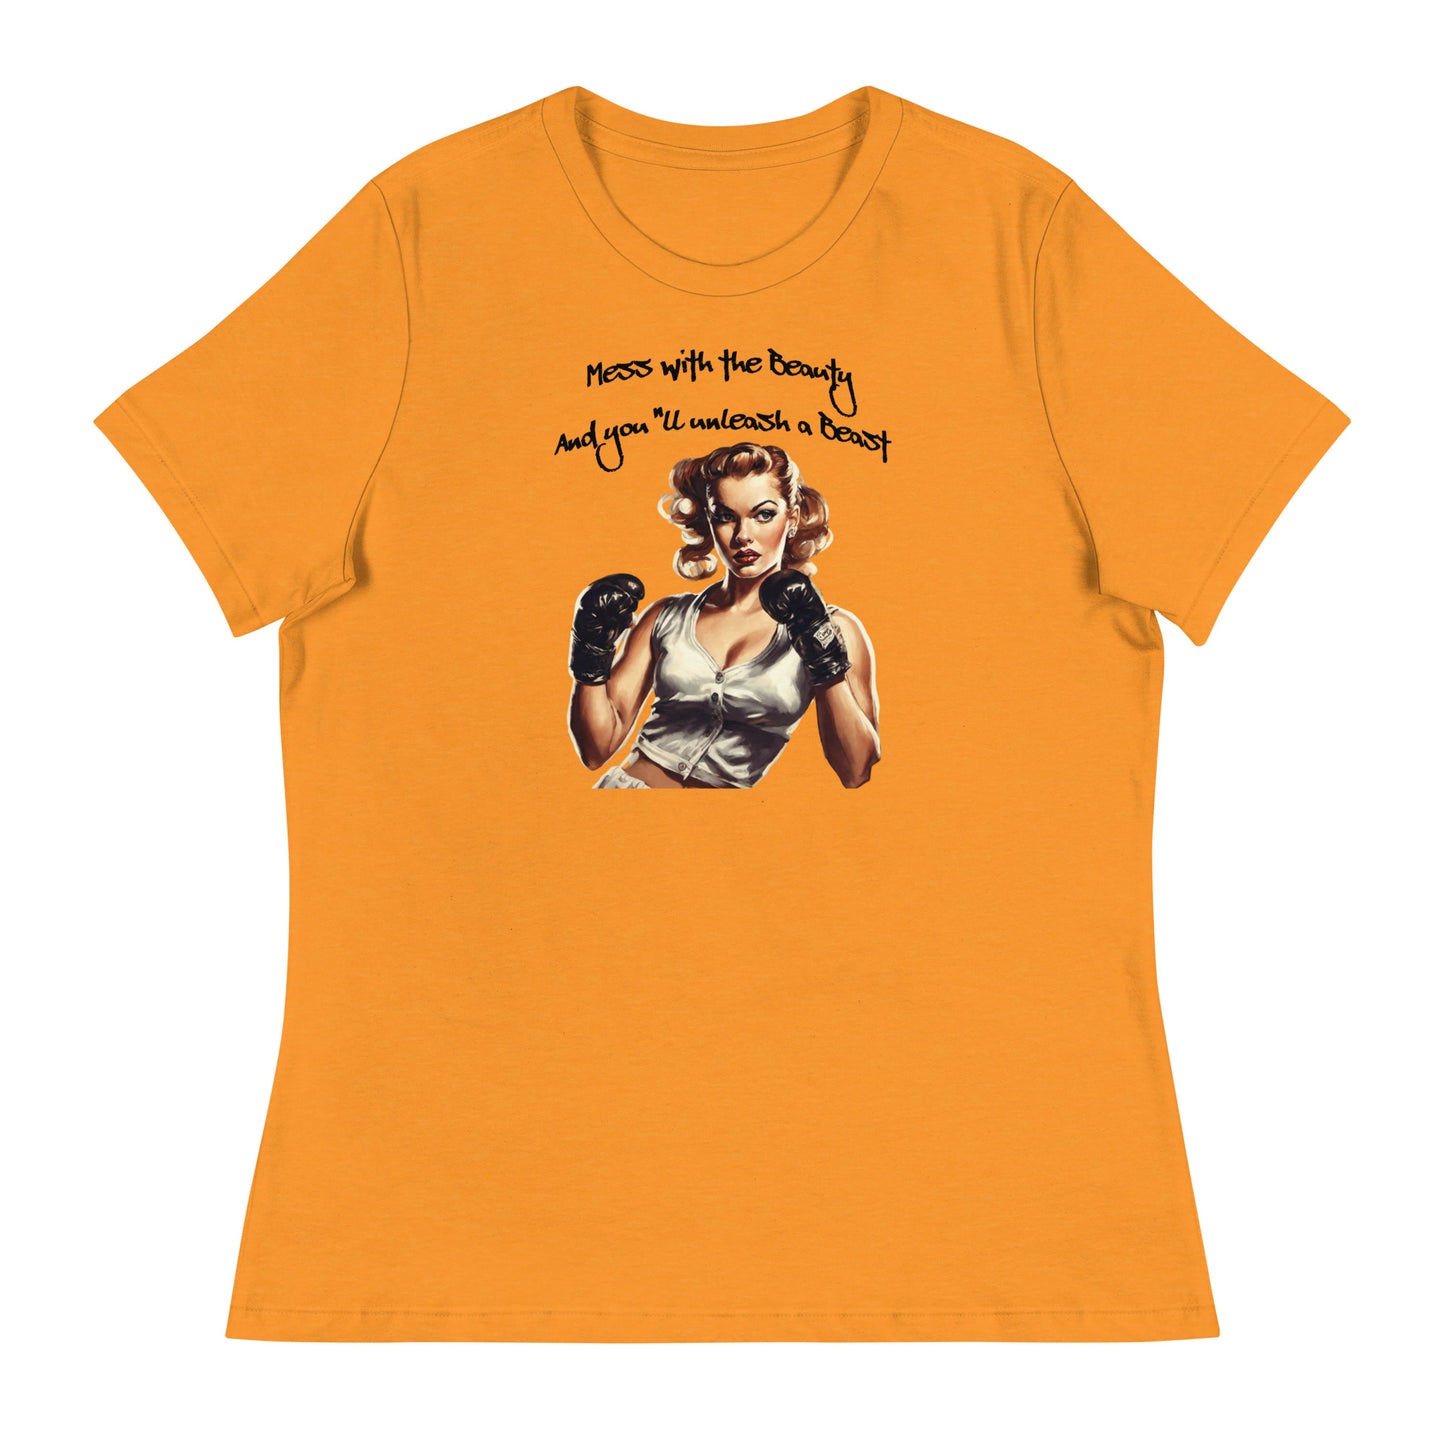 Mess with the Beauty, Unleash the Beast Women's Strength T-Shirt Heather Marmalade